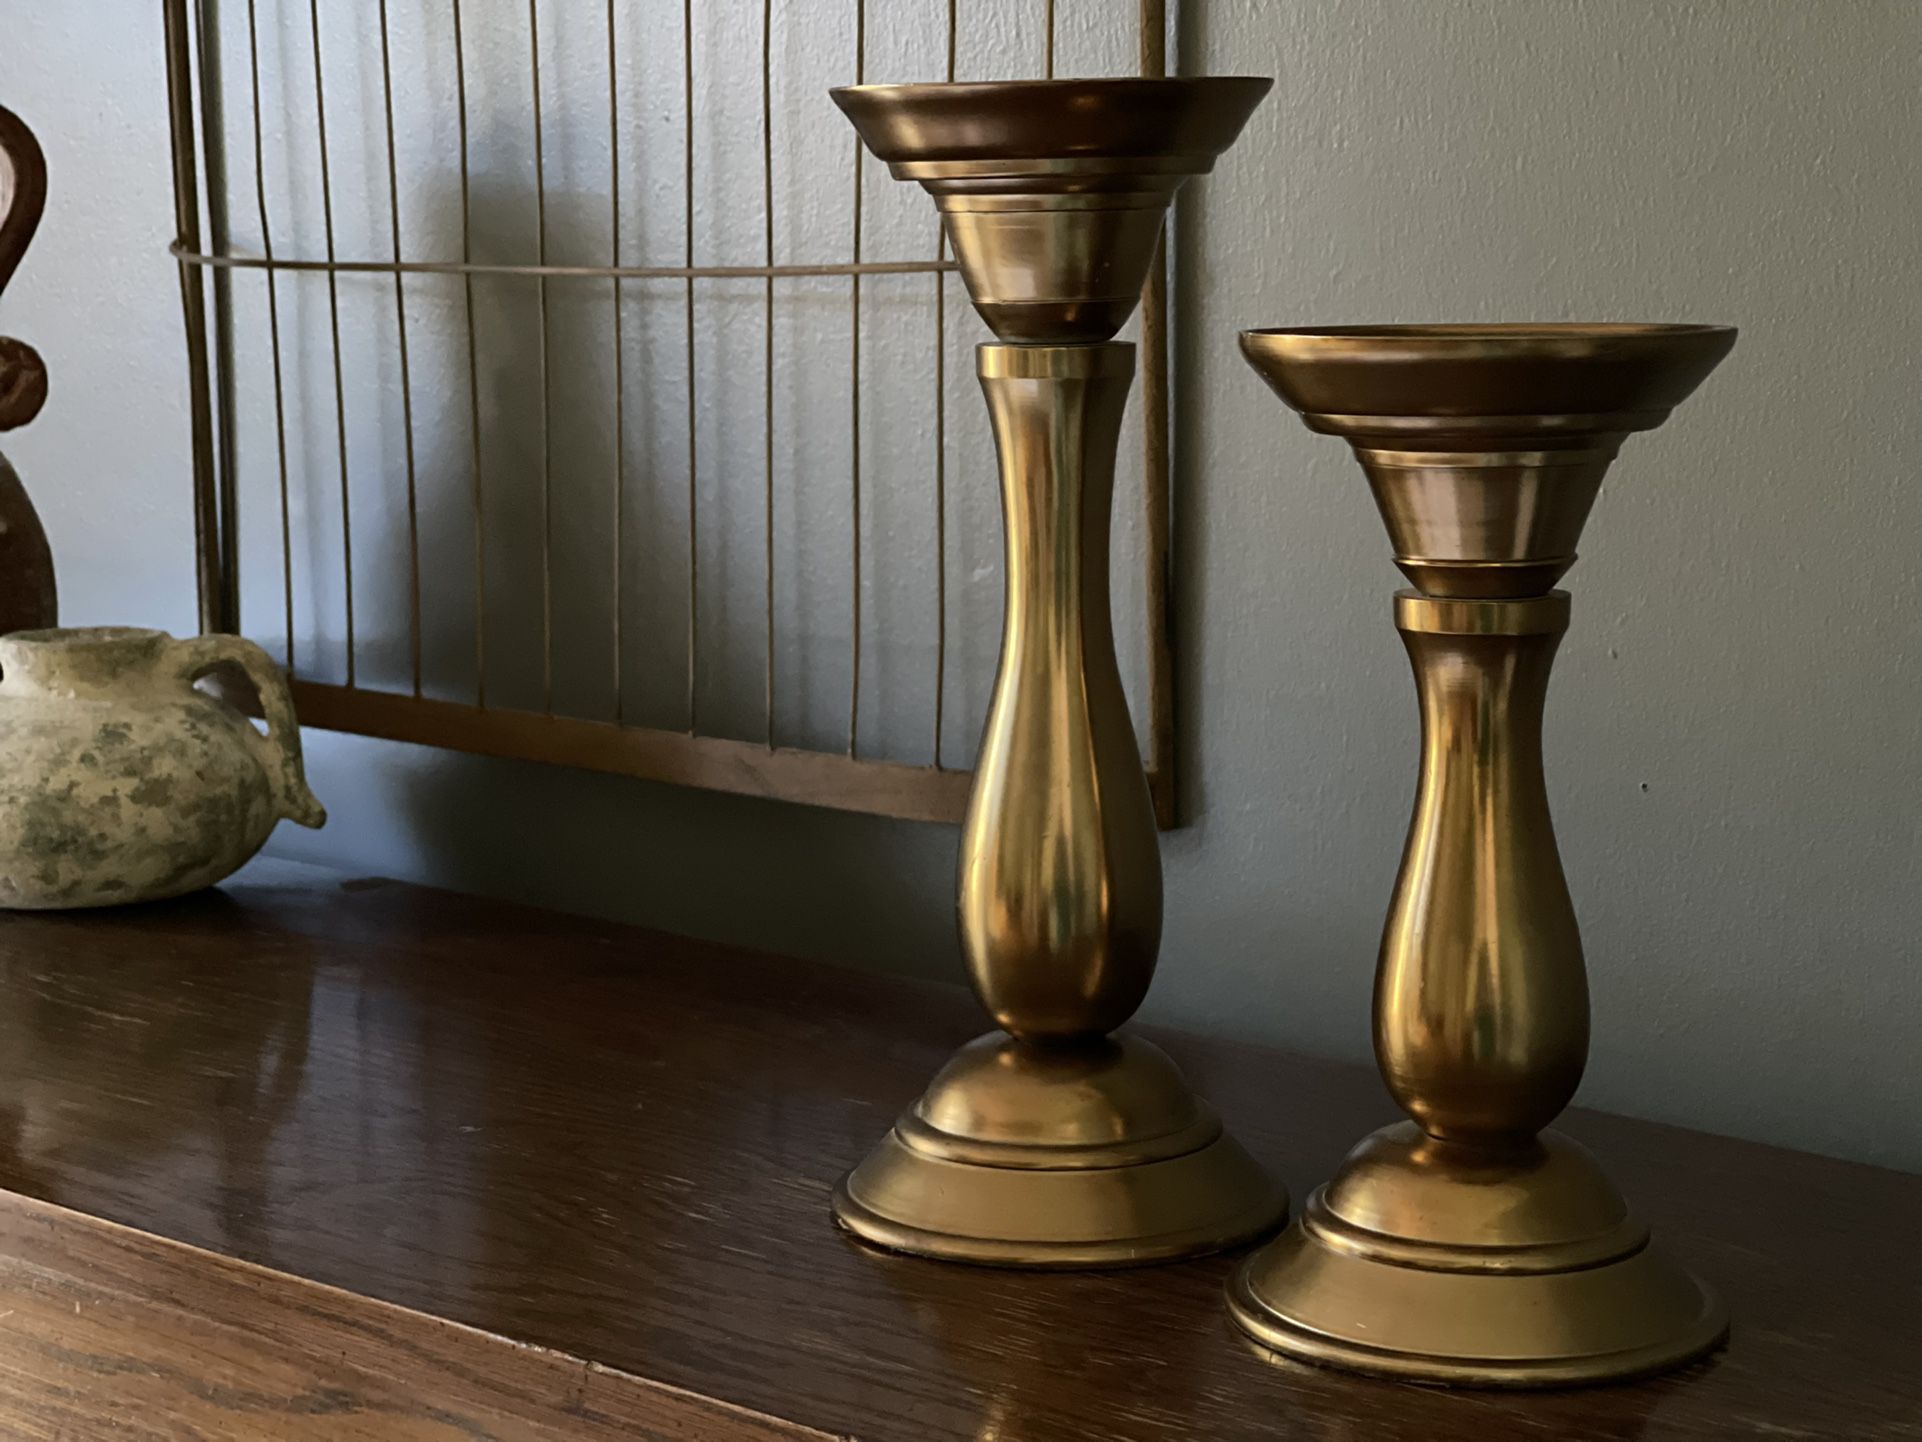 Beautiful & Heavy Candle Holders. $35